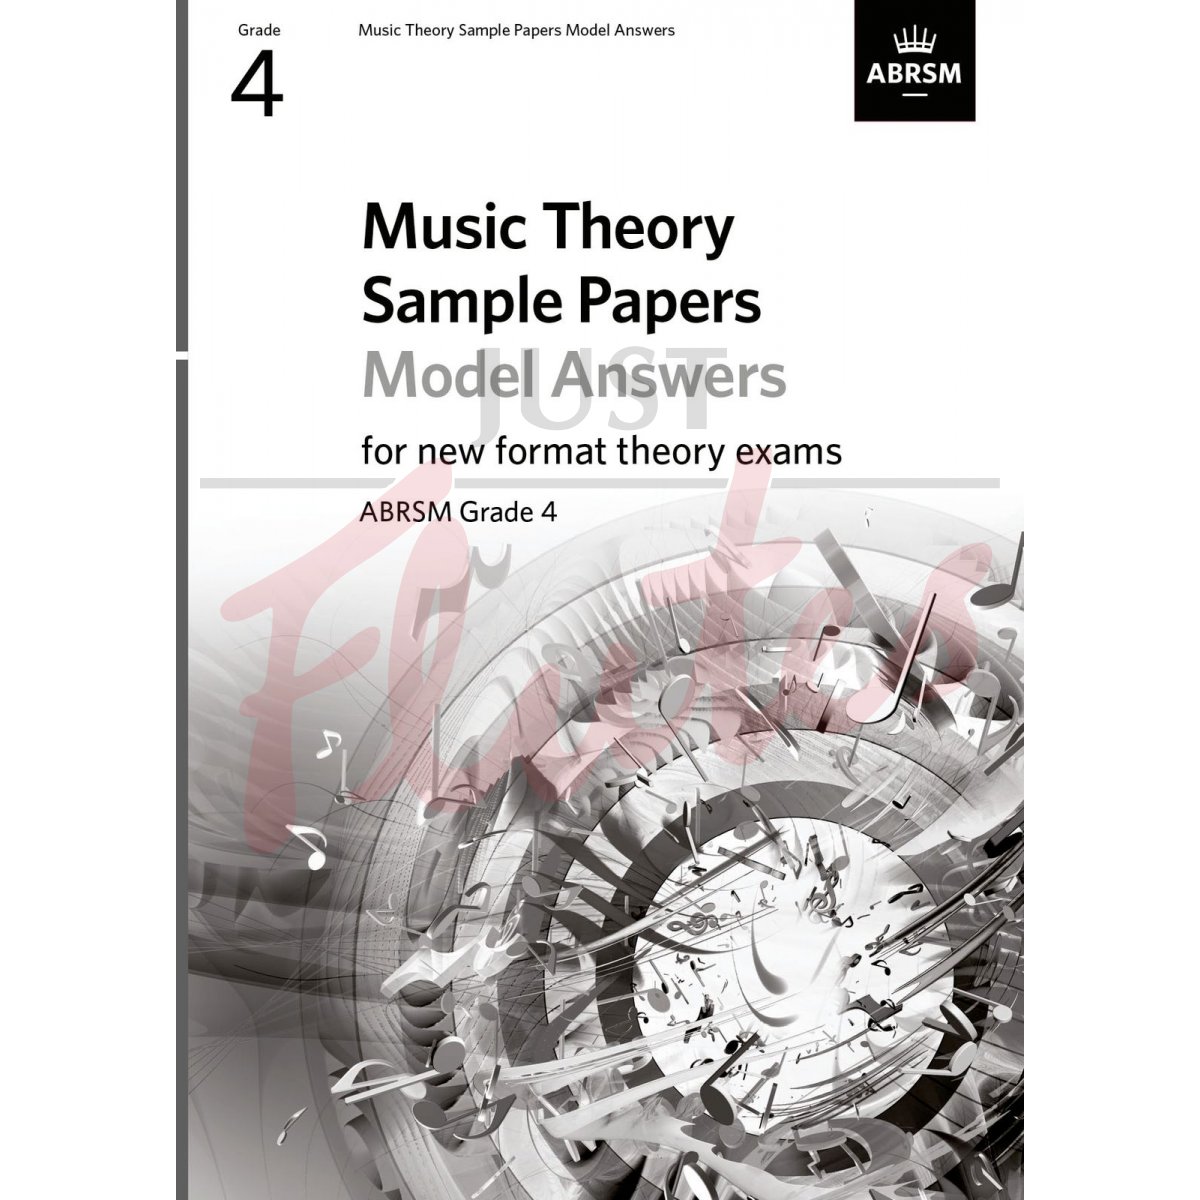 Music Theory Sample Papers Grade 4 - Model Answers